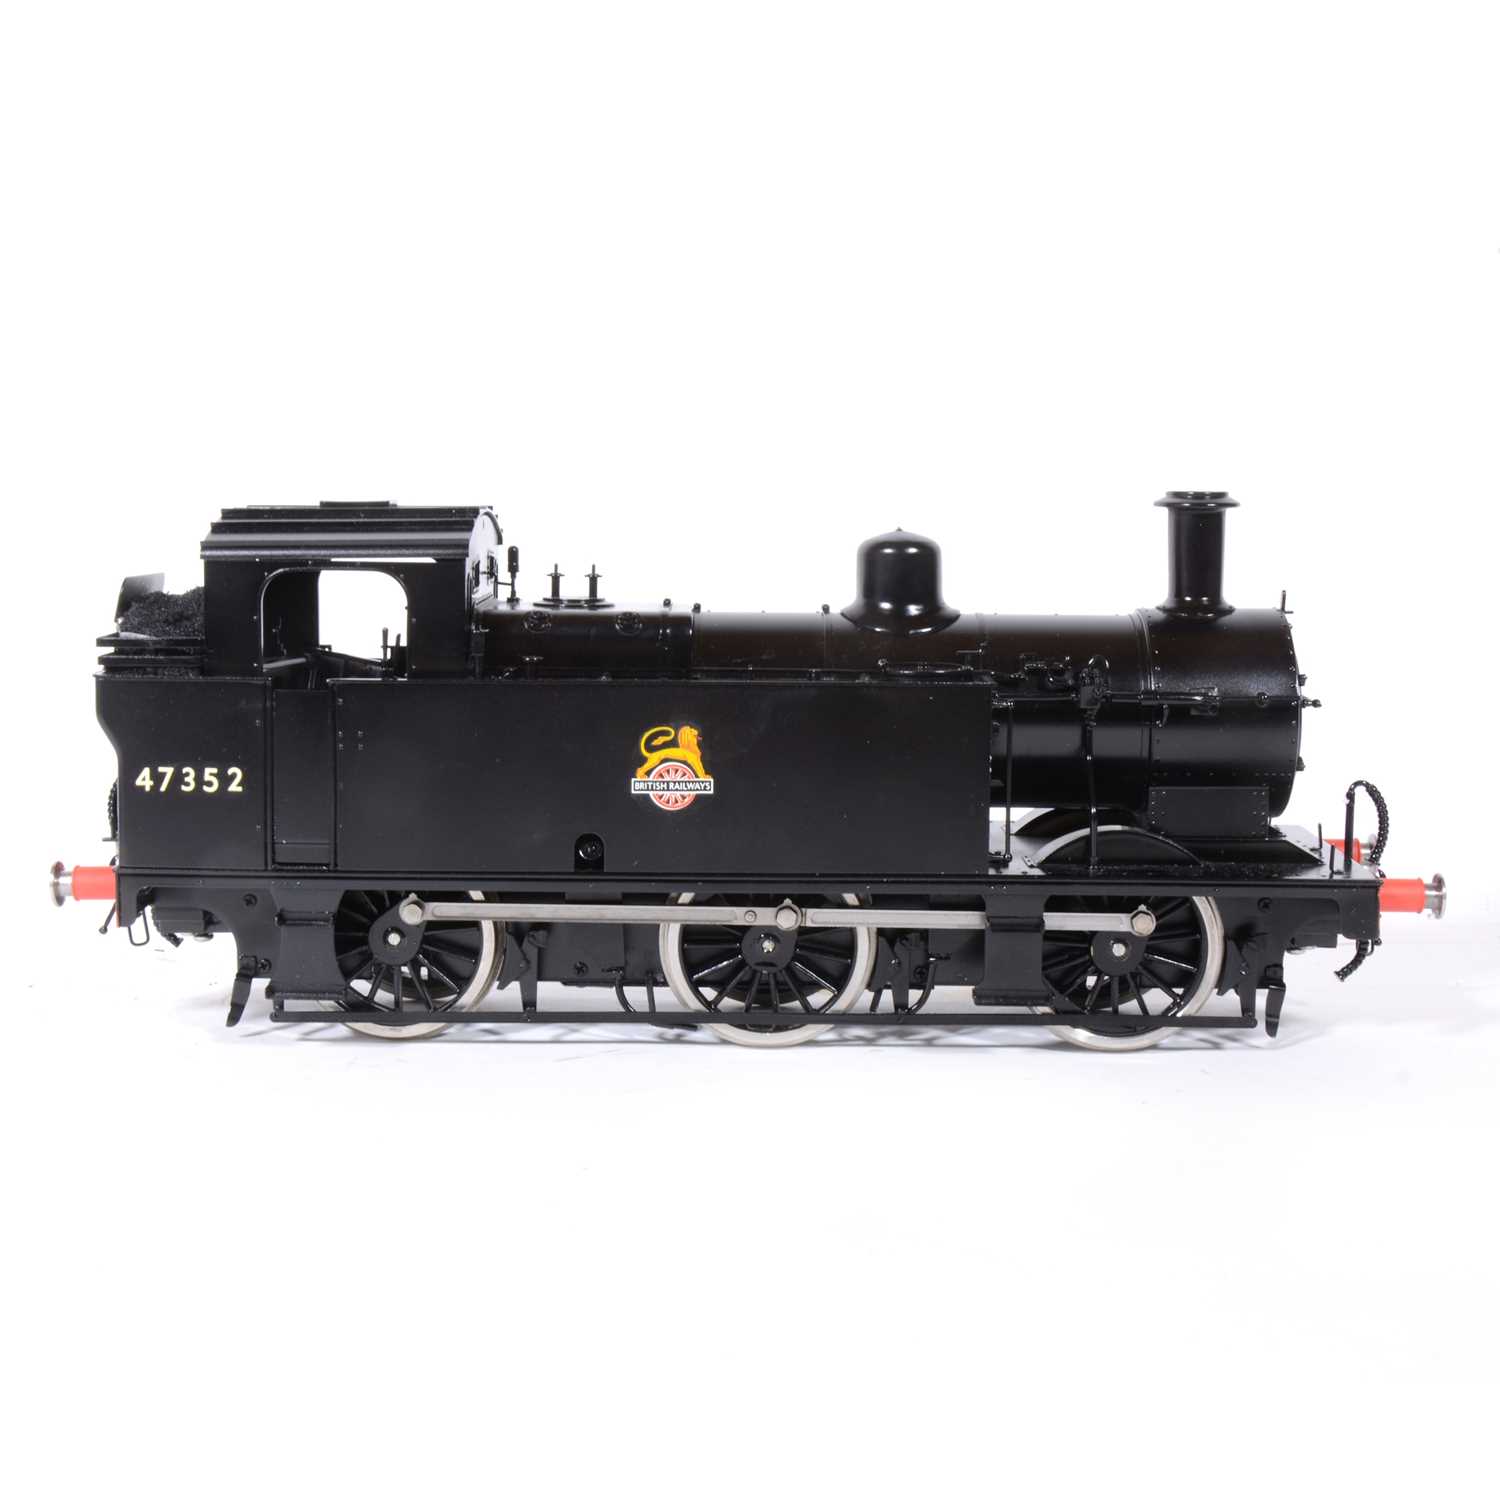 Lot 51 - Bachmann Brassworks electric, gauge 1 / G scale, 45mm locomotive, 0-6-0, Jinty, BR black, in box, with RC.